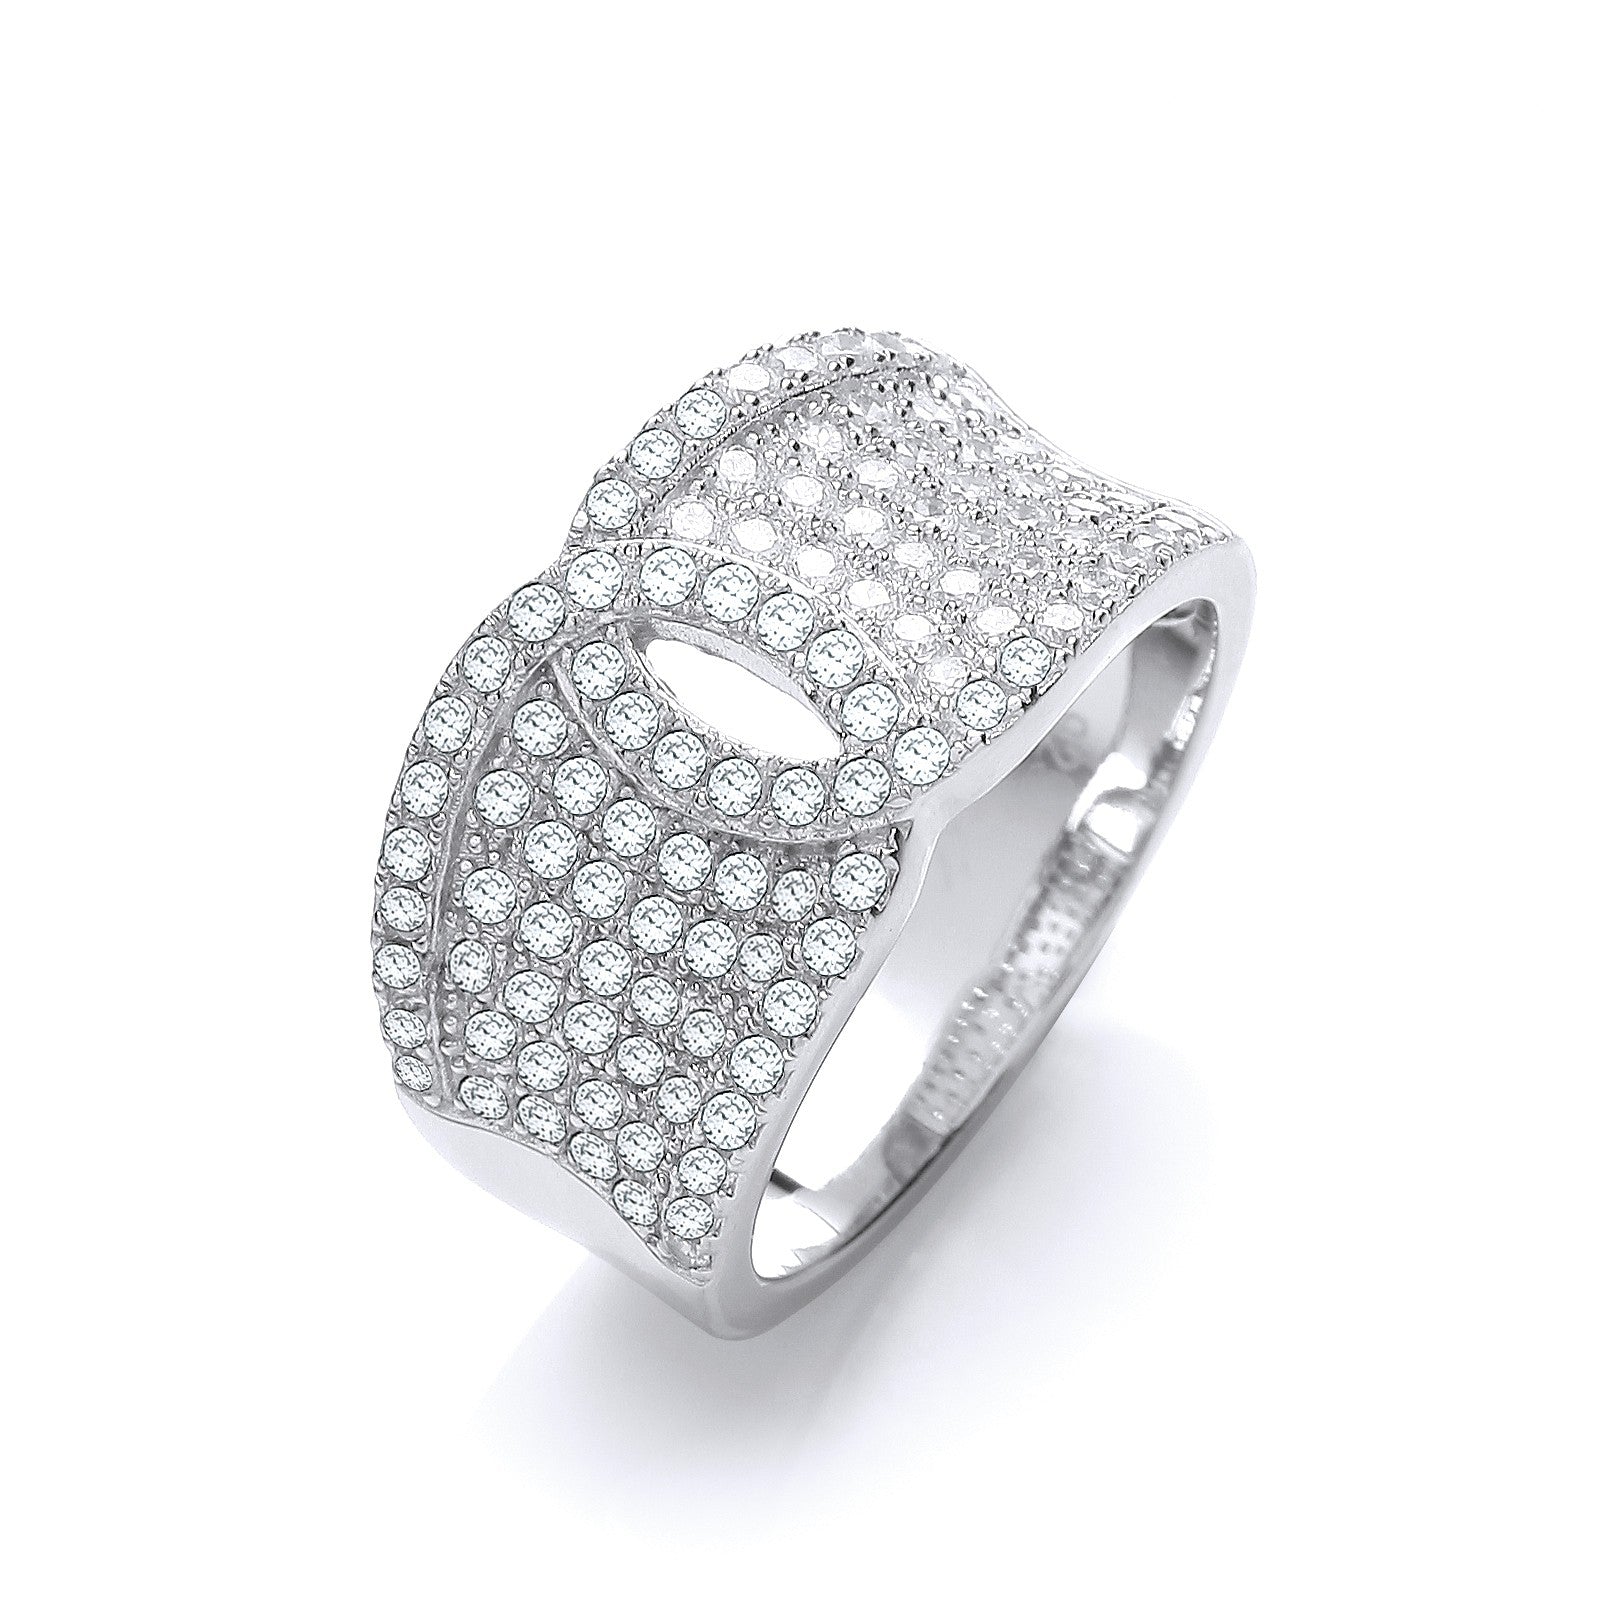 Micro Pave' White Cubic Zirconia Ring